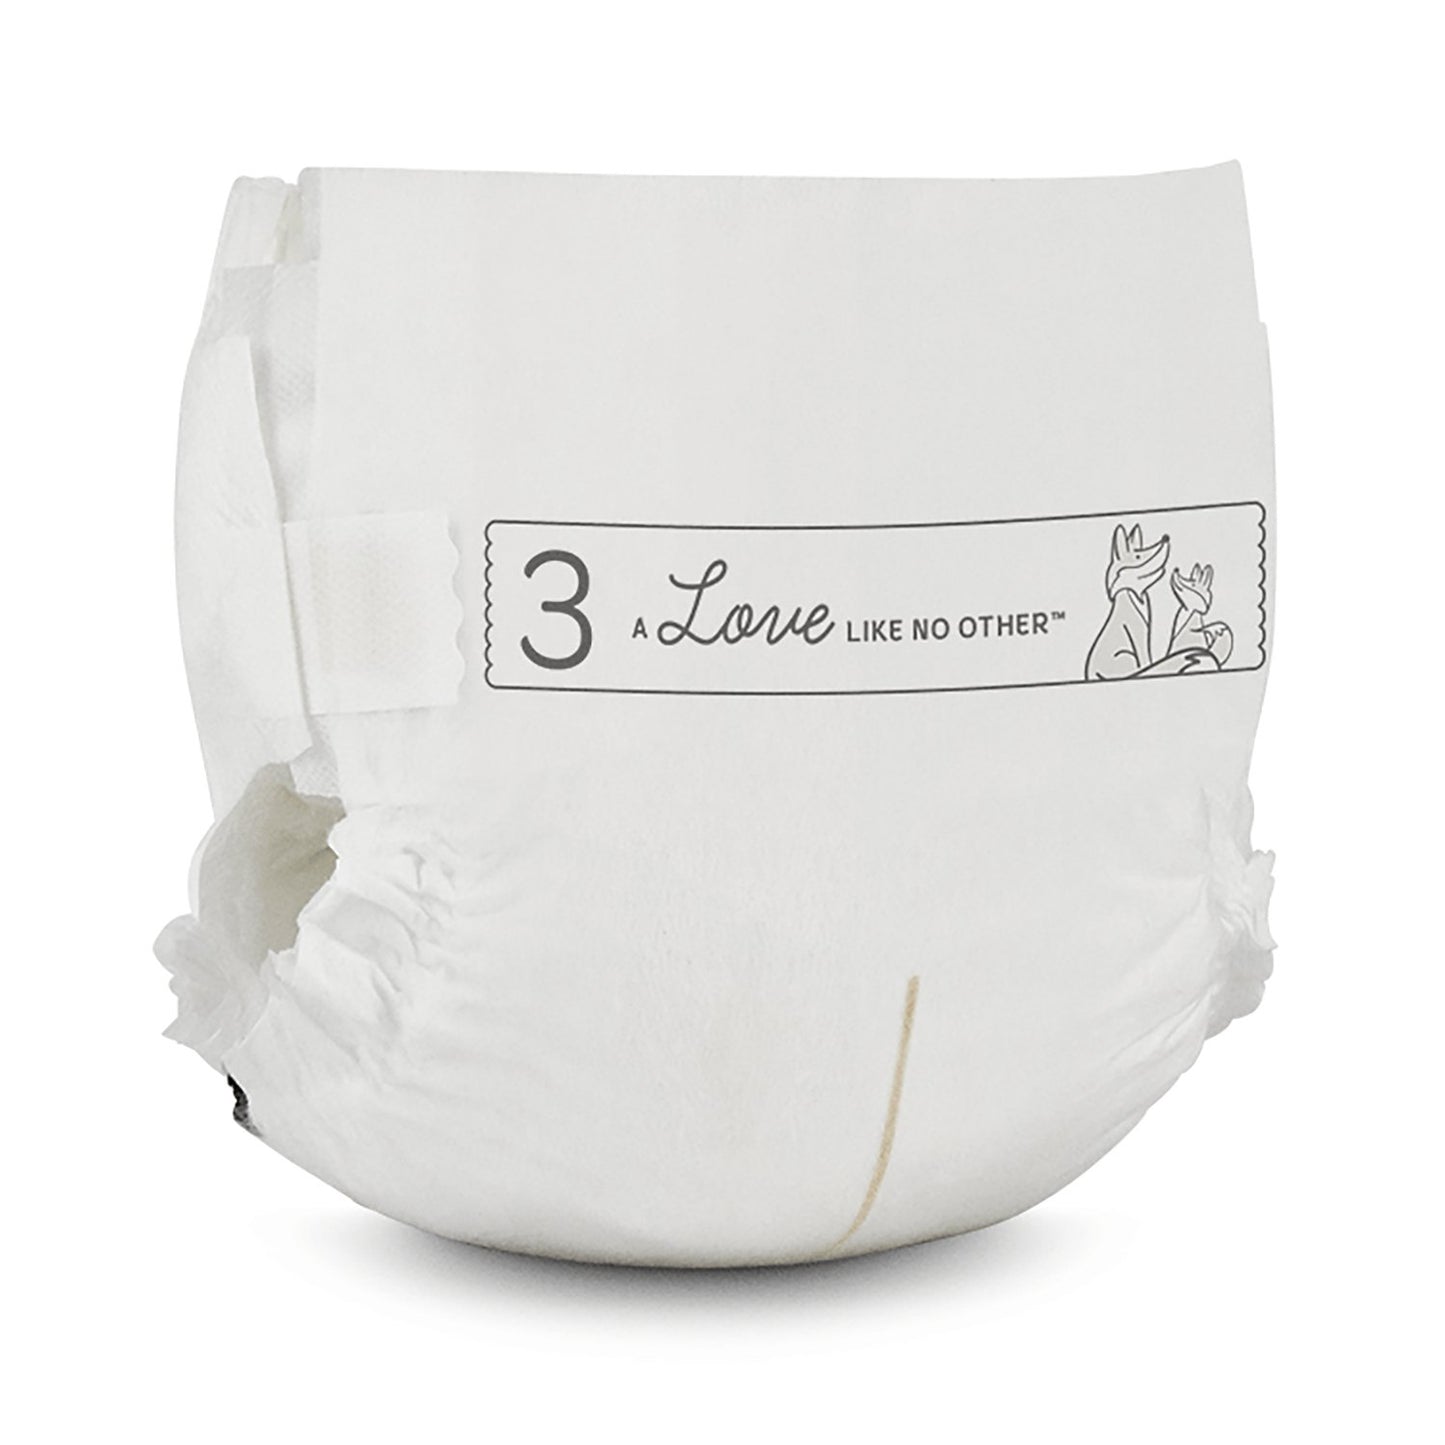 Bambo Nature Baby Diaper [Size 3 / 4-9kg] 33/pack